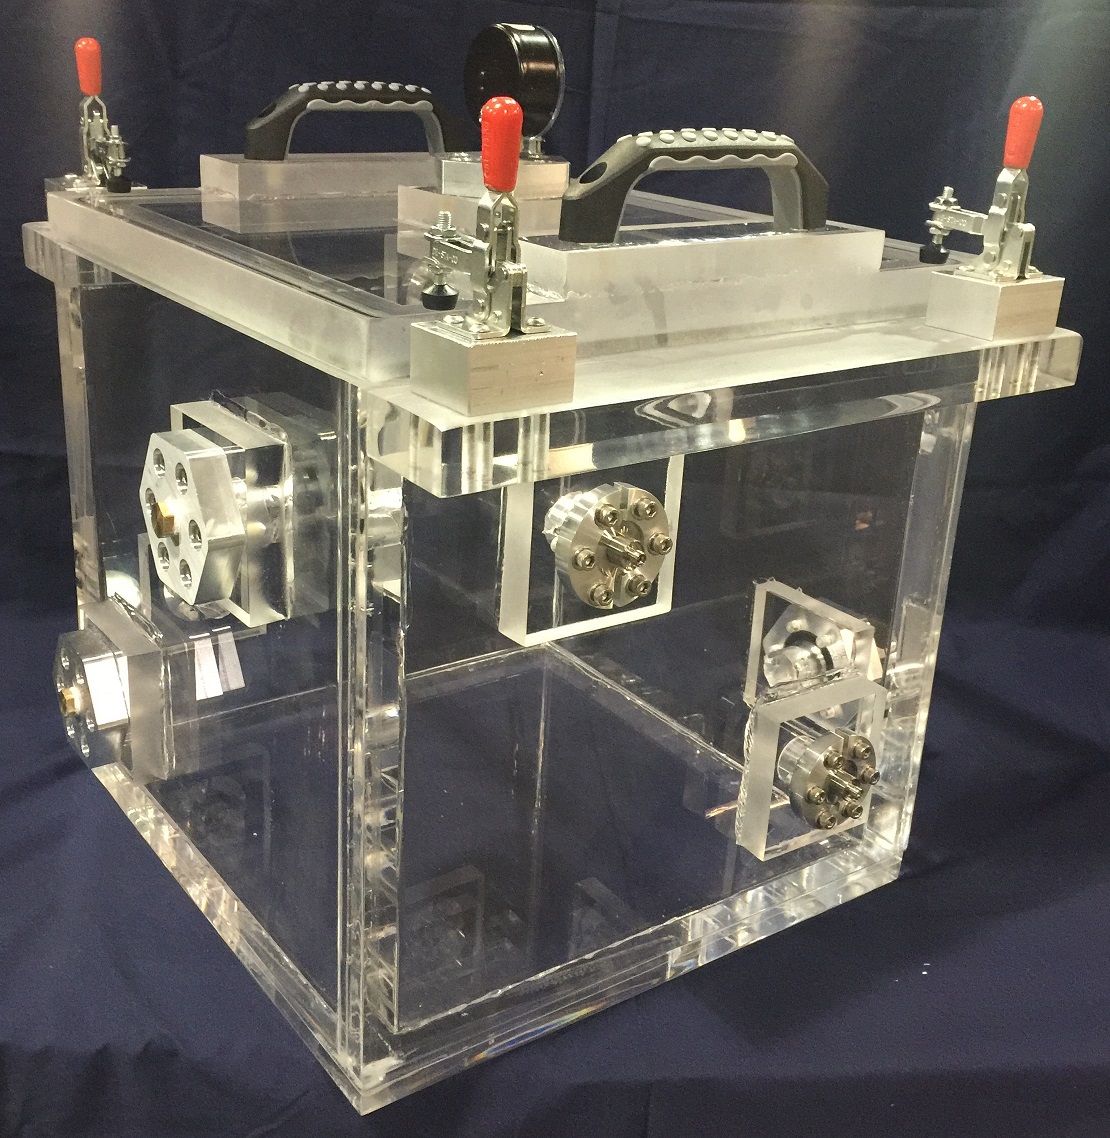 lexan chamber for tests on fuel cells vacuum test chamber